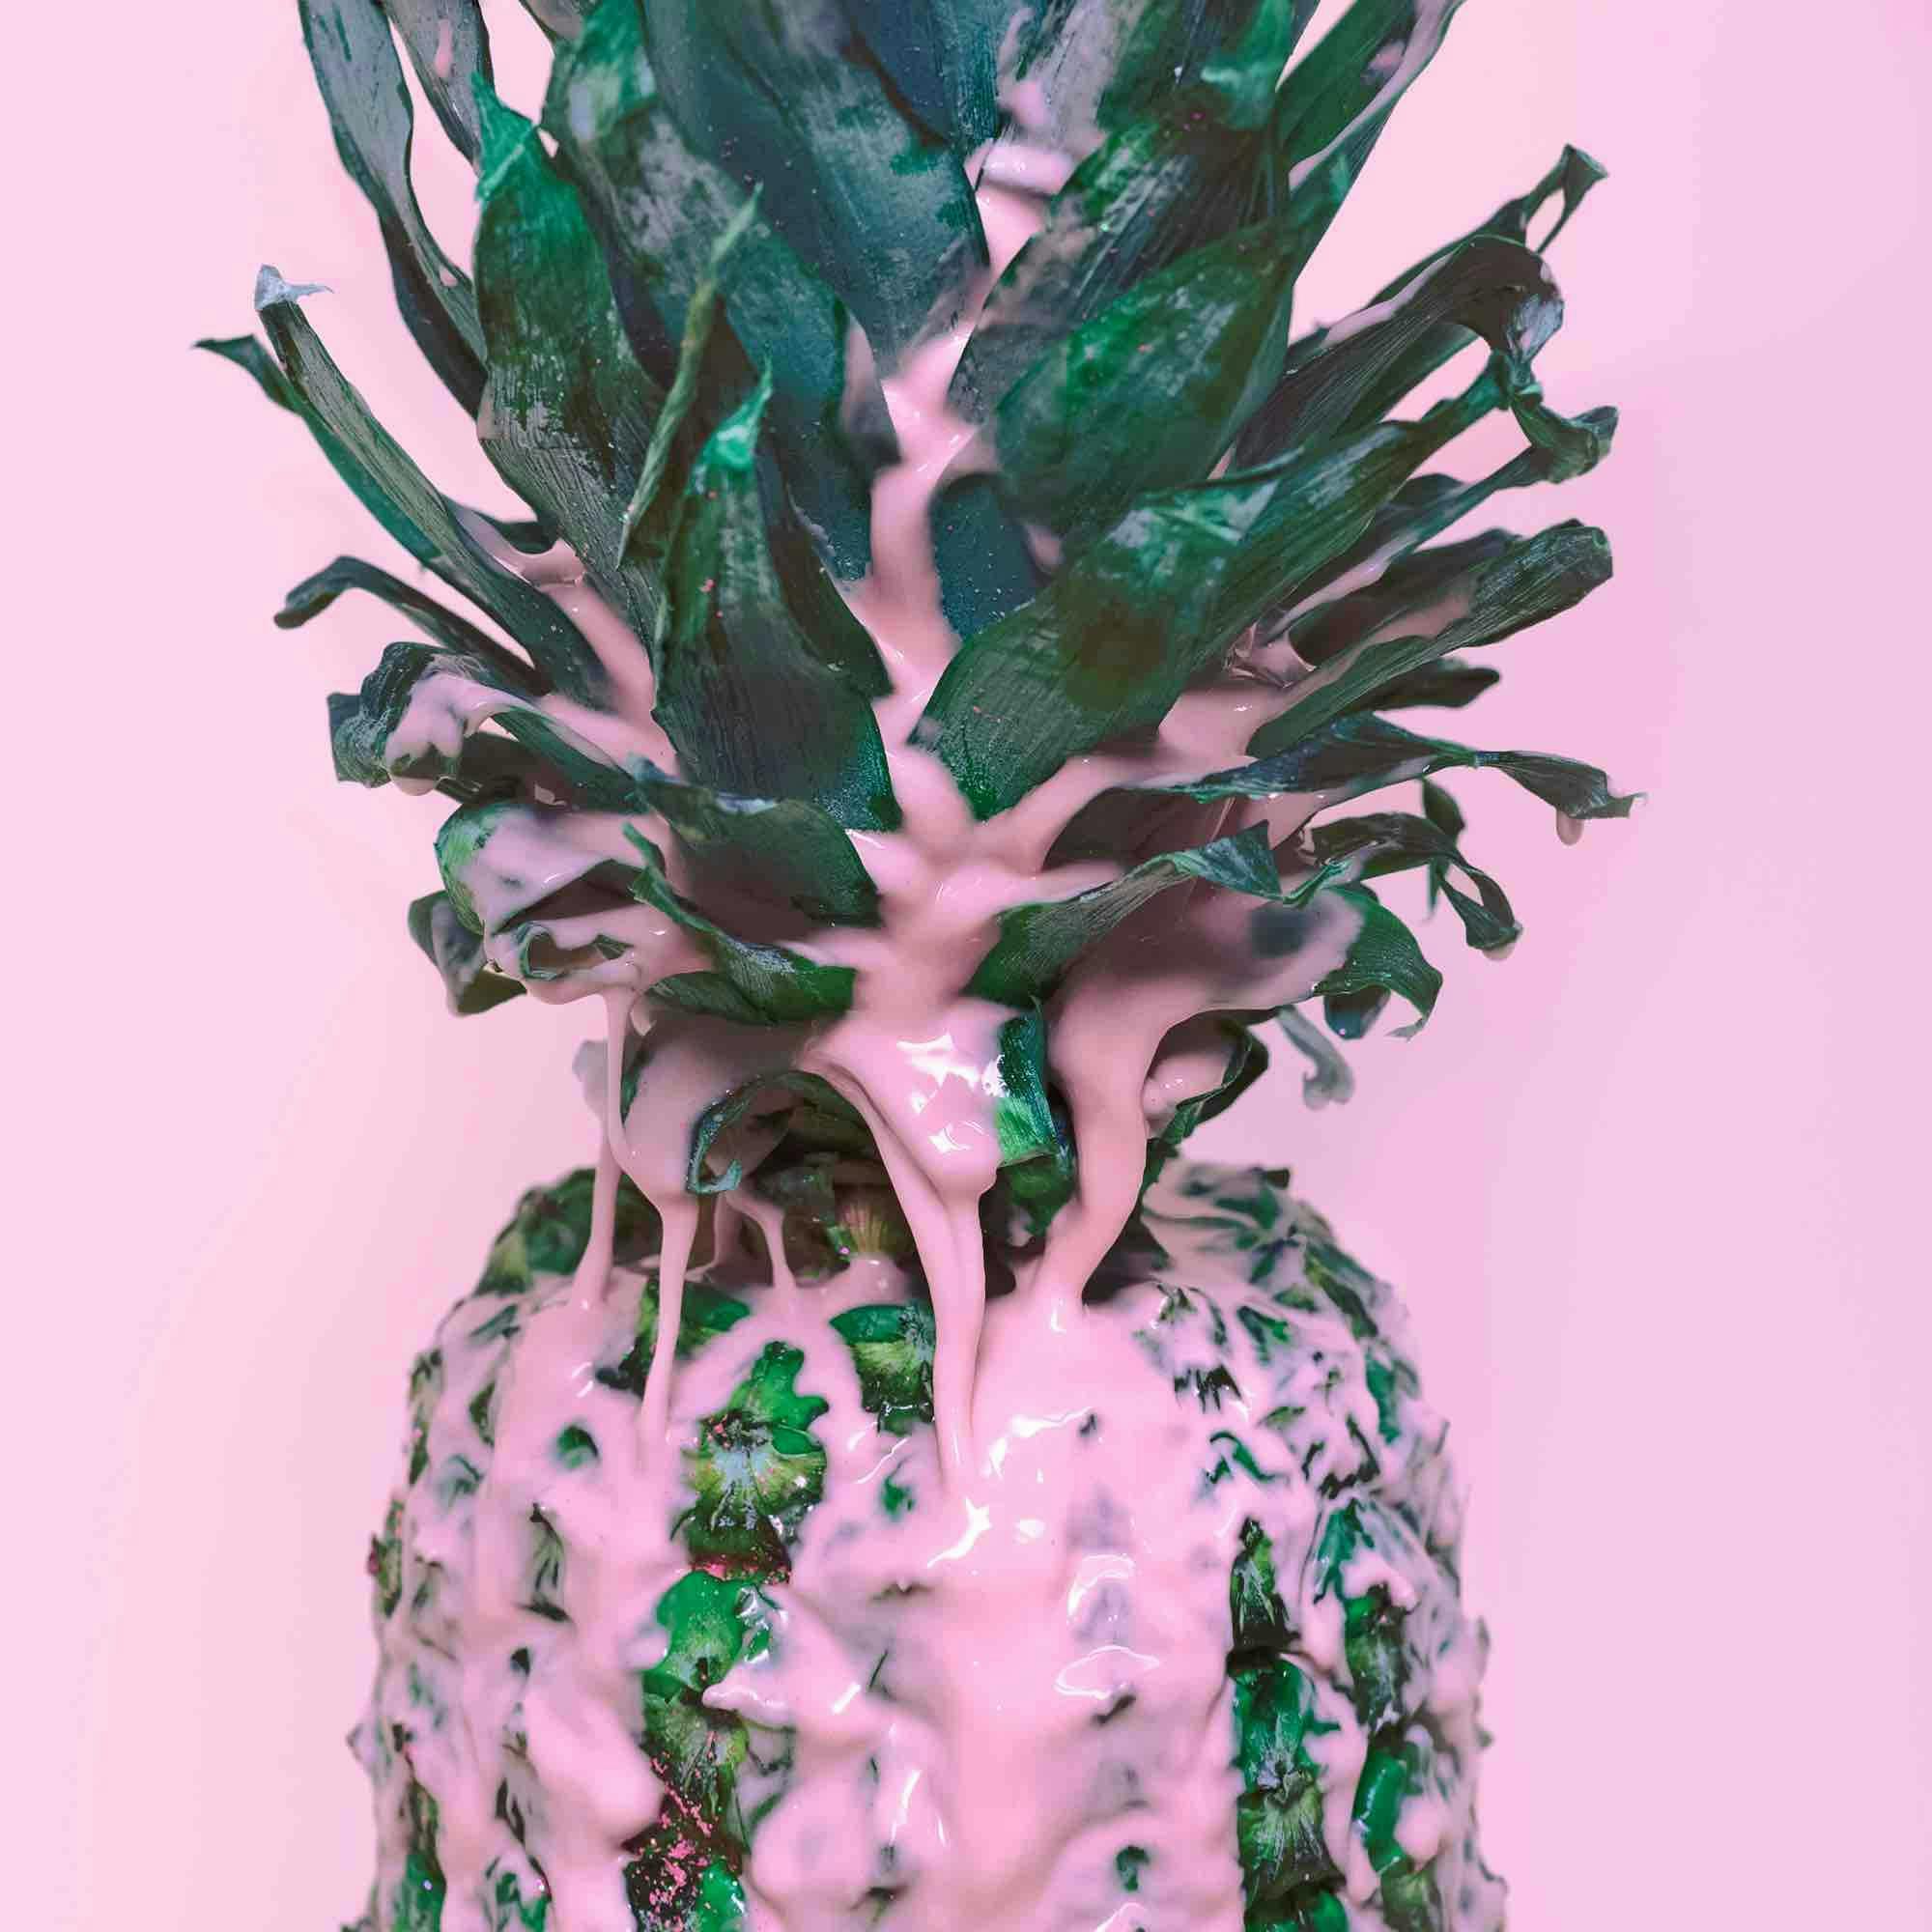 drop,pink,half,beauty,color,shadow,trend,fruit,happy,hipster,isolated,paint,colors,drain,summer,shot,minimal,minimalism,pastel,humor,cocktail,fool,glamor,design,exclusive,diet,vanilla,art,abstraction,juice,food,tropical,emotion,pineapple,round,background,beach,funky,fake,geometry,style,circle,fresh,pulp,fun,fashion plant